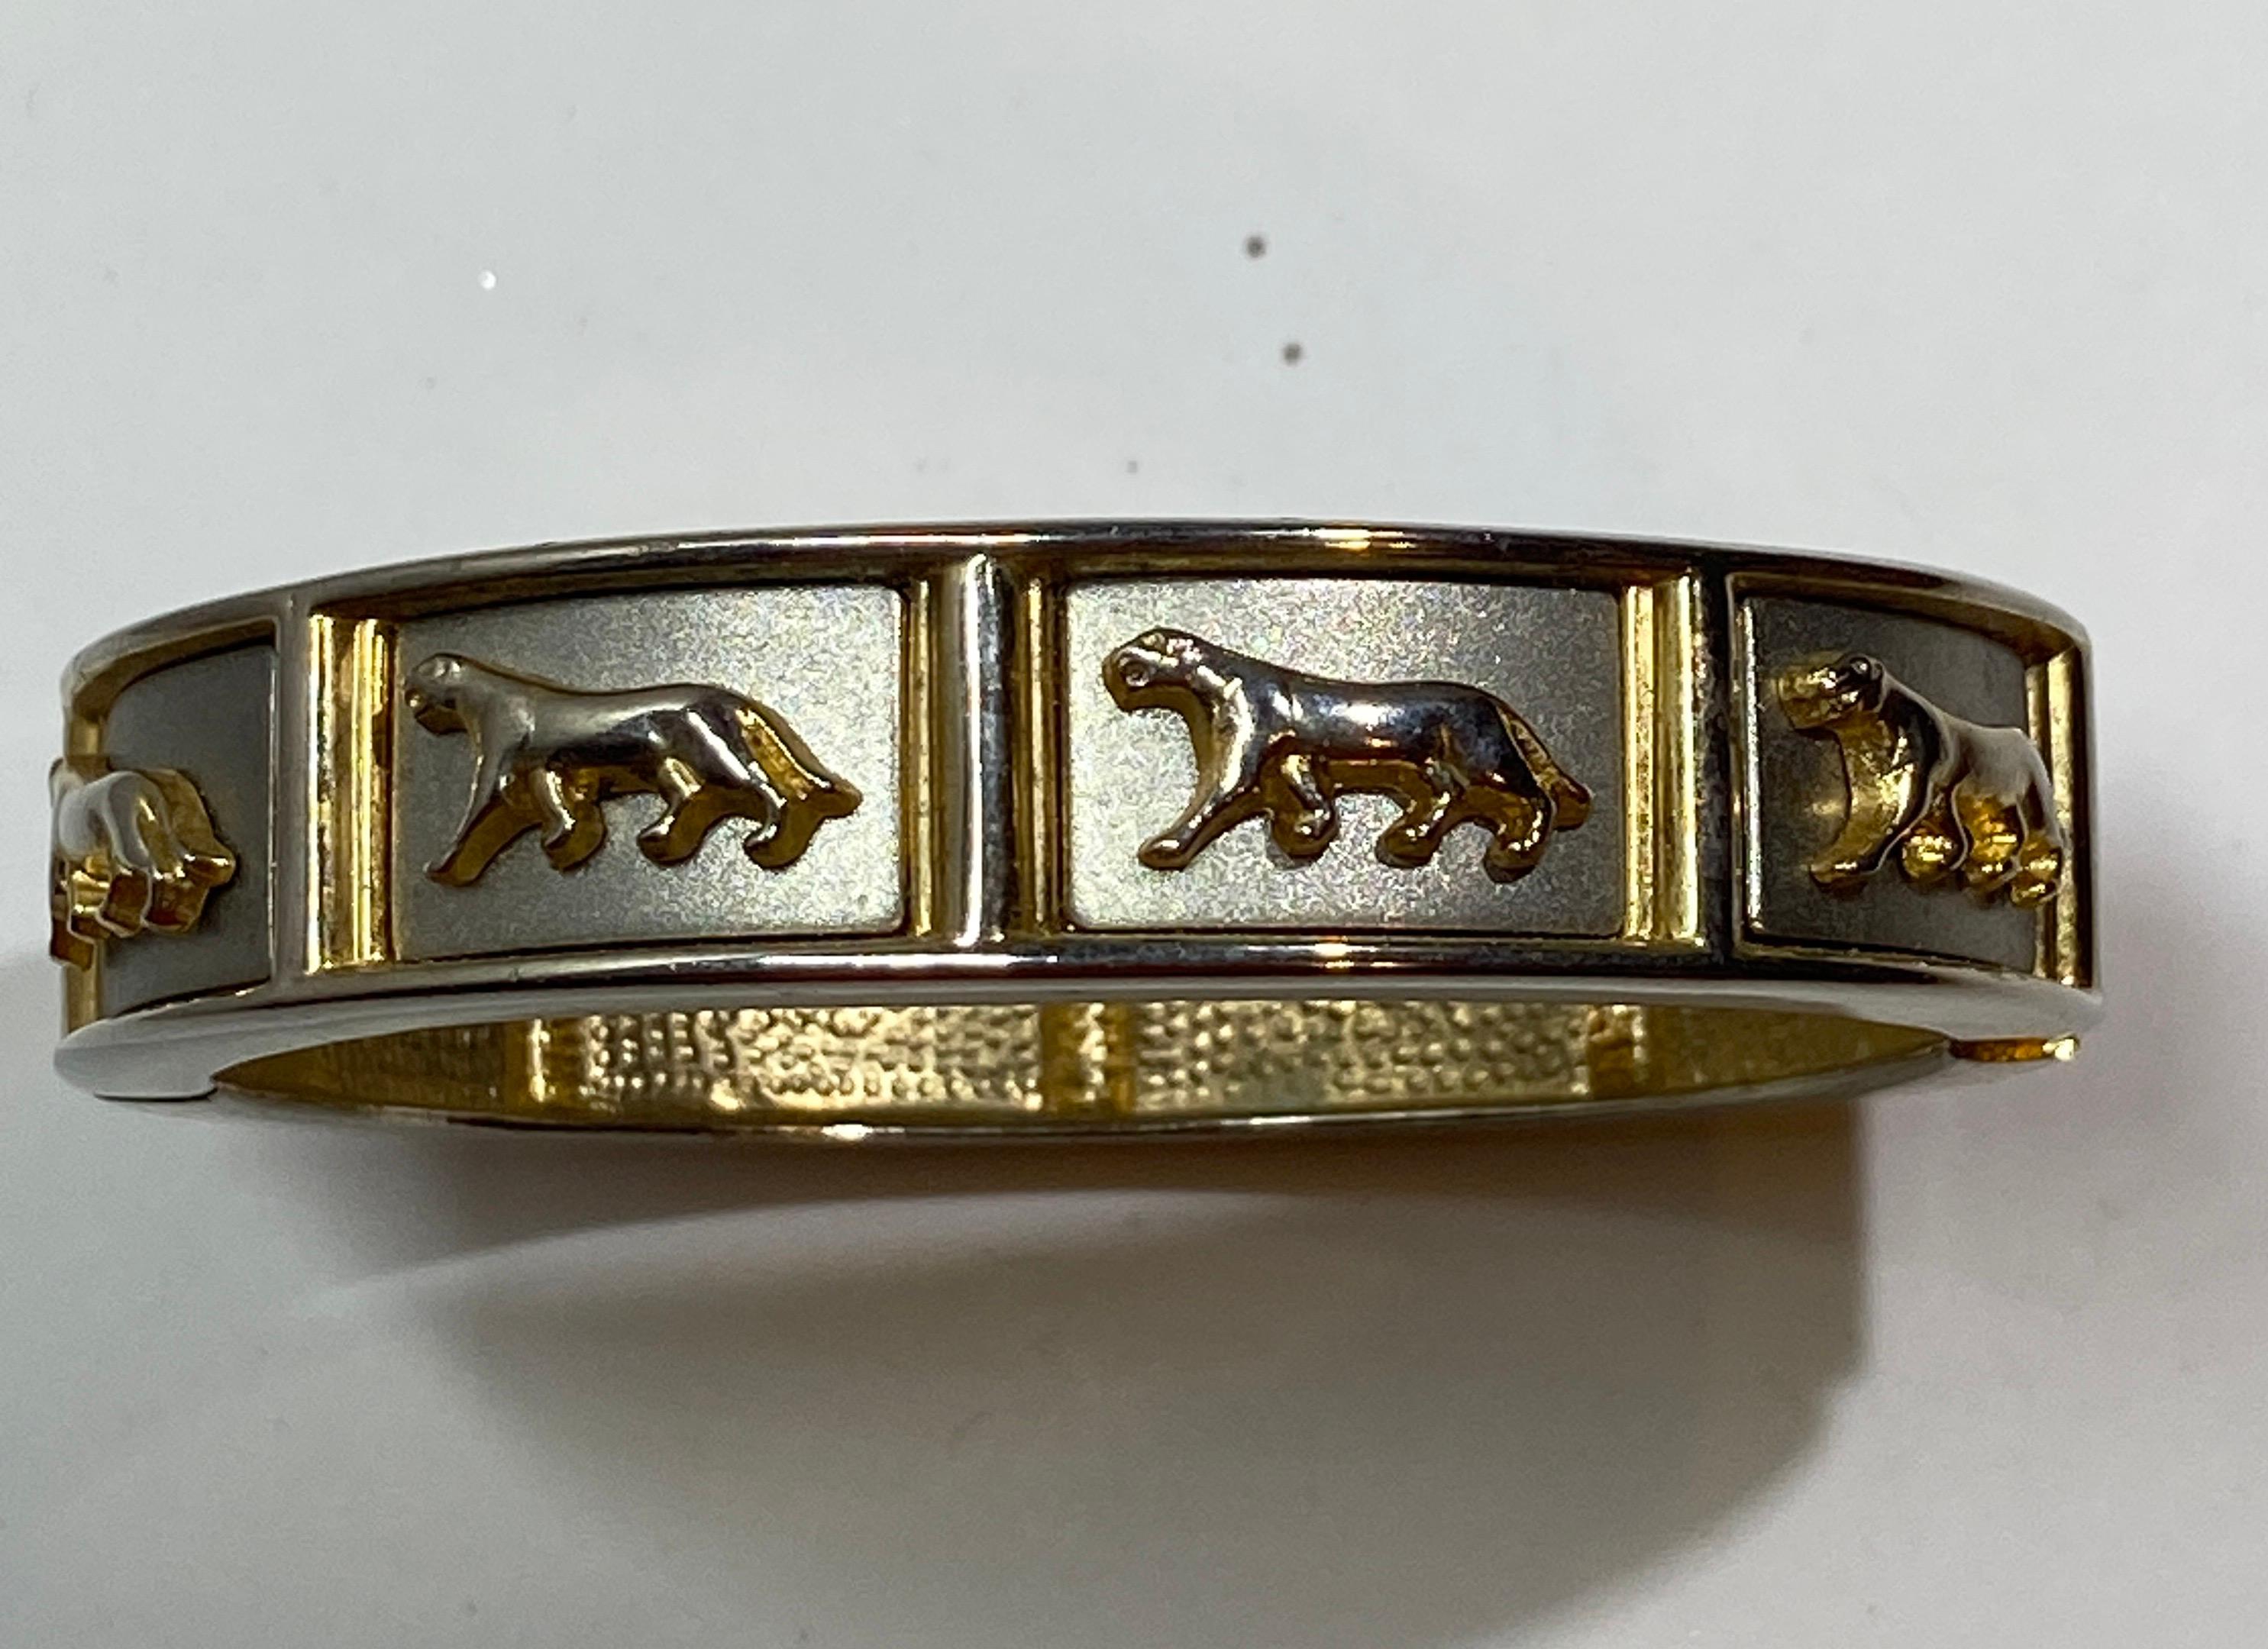 Detailed Baroque Polished Gold And Silver Hardware Bracelet In Good Condition For Sale In New York, NY